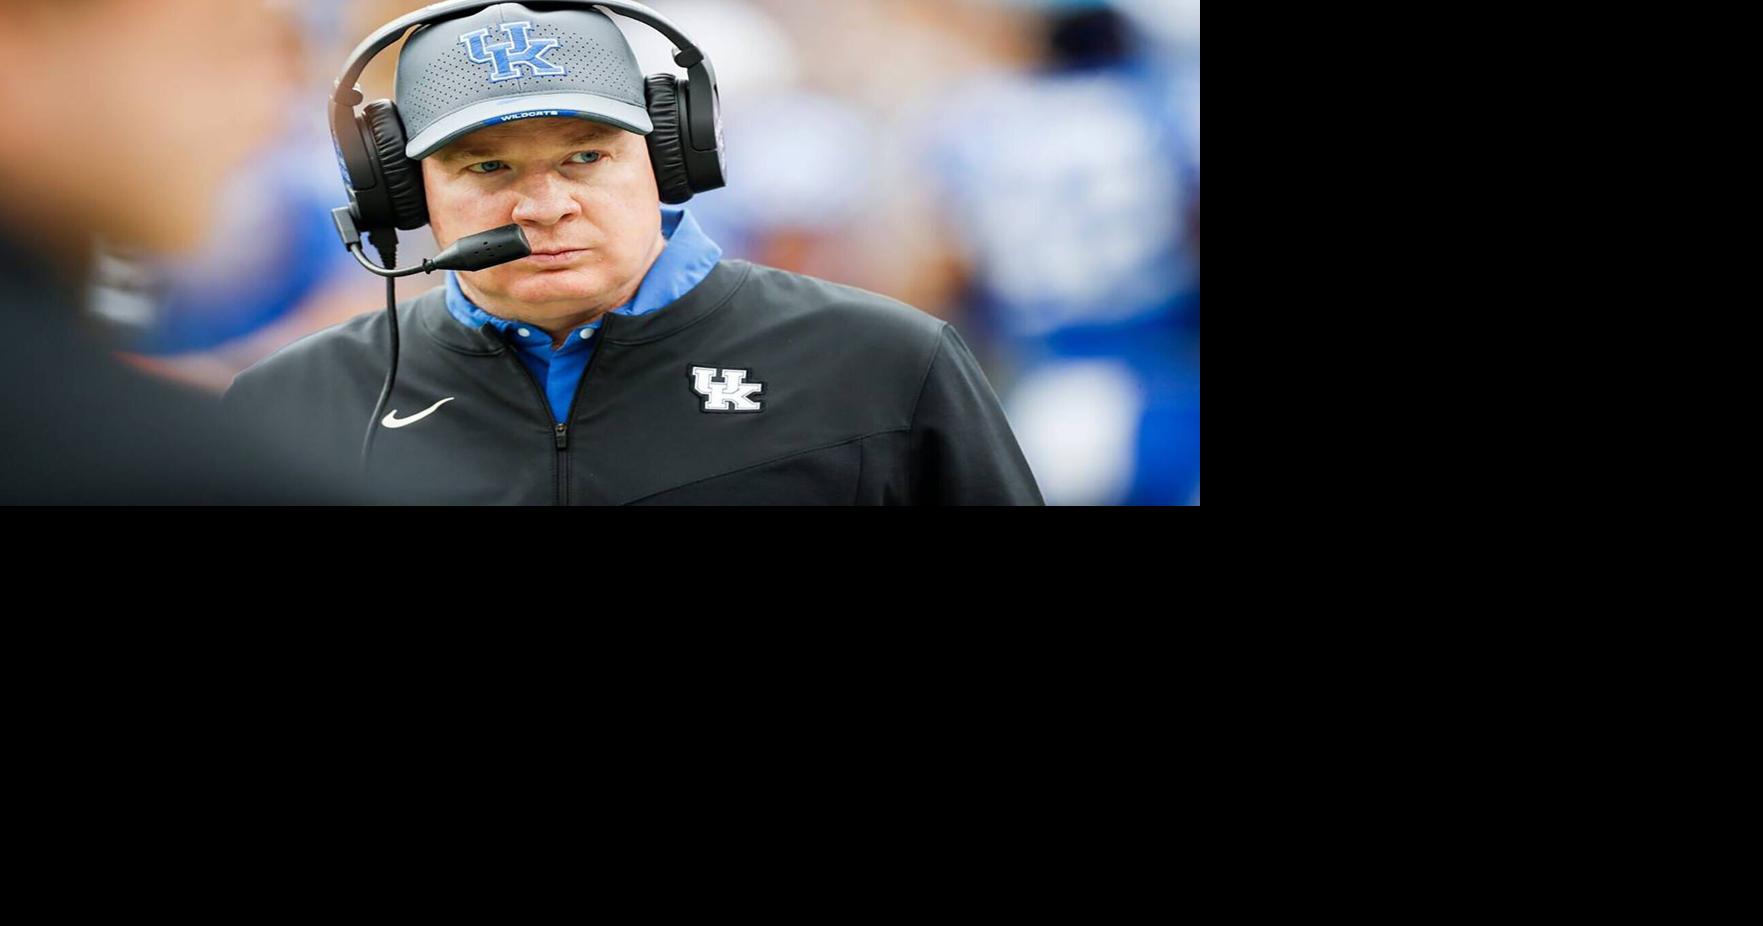 Mark Stoops says he will stay at Kentucky after pursuit from Texas A&M